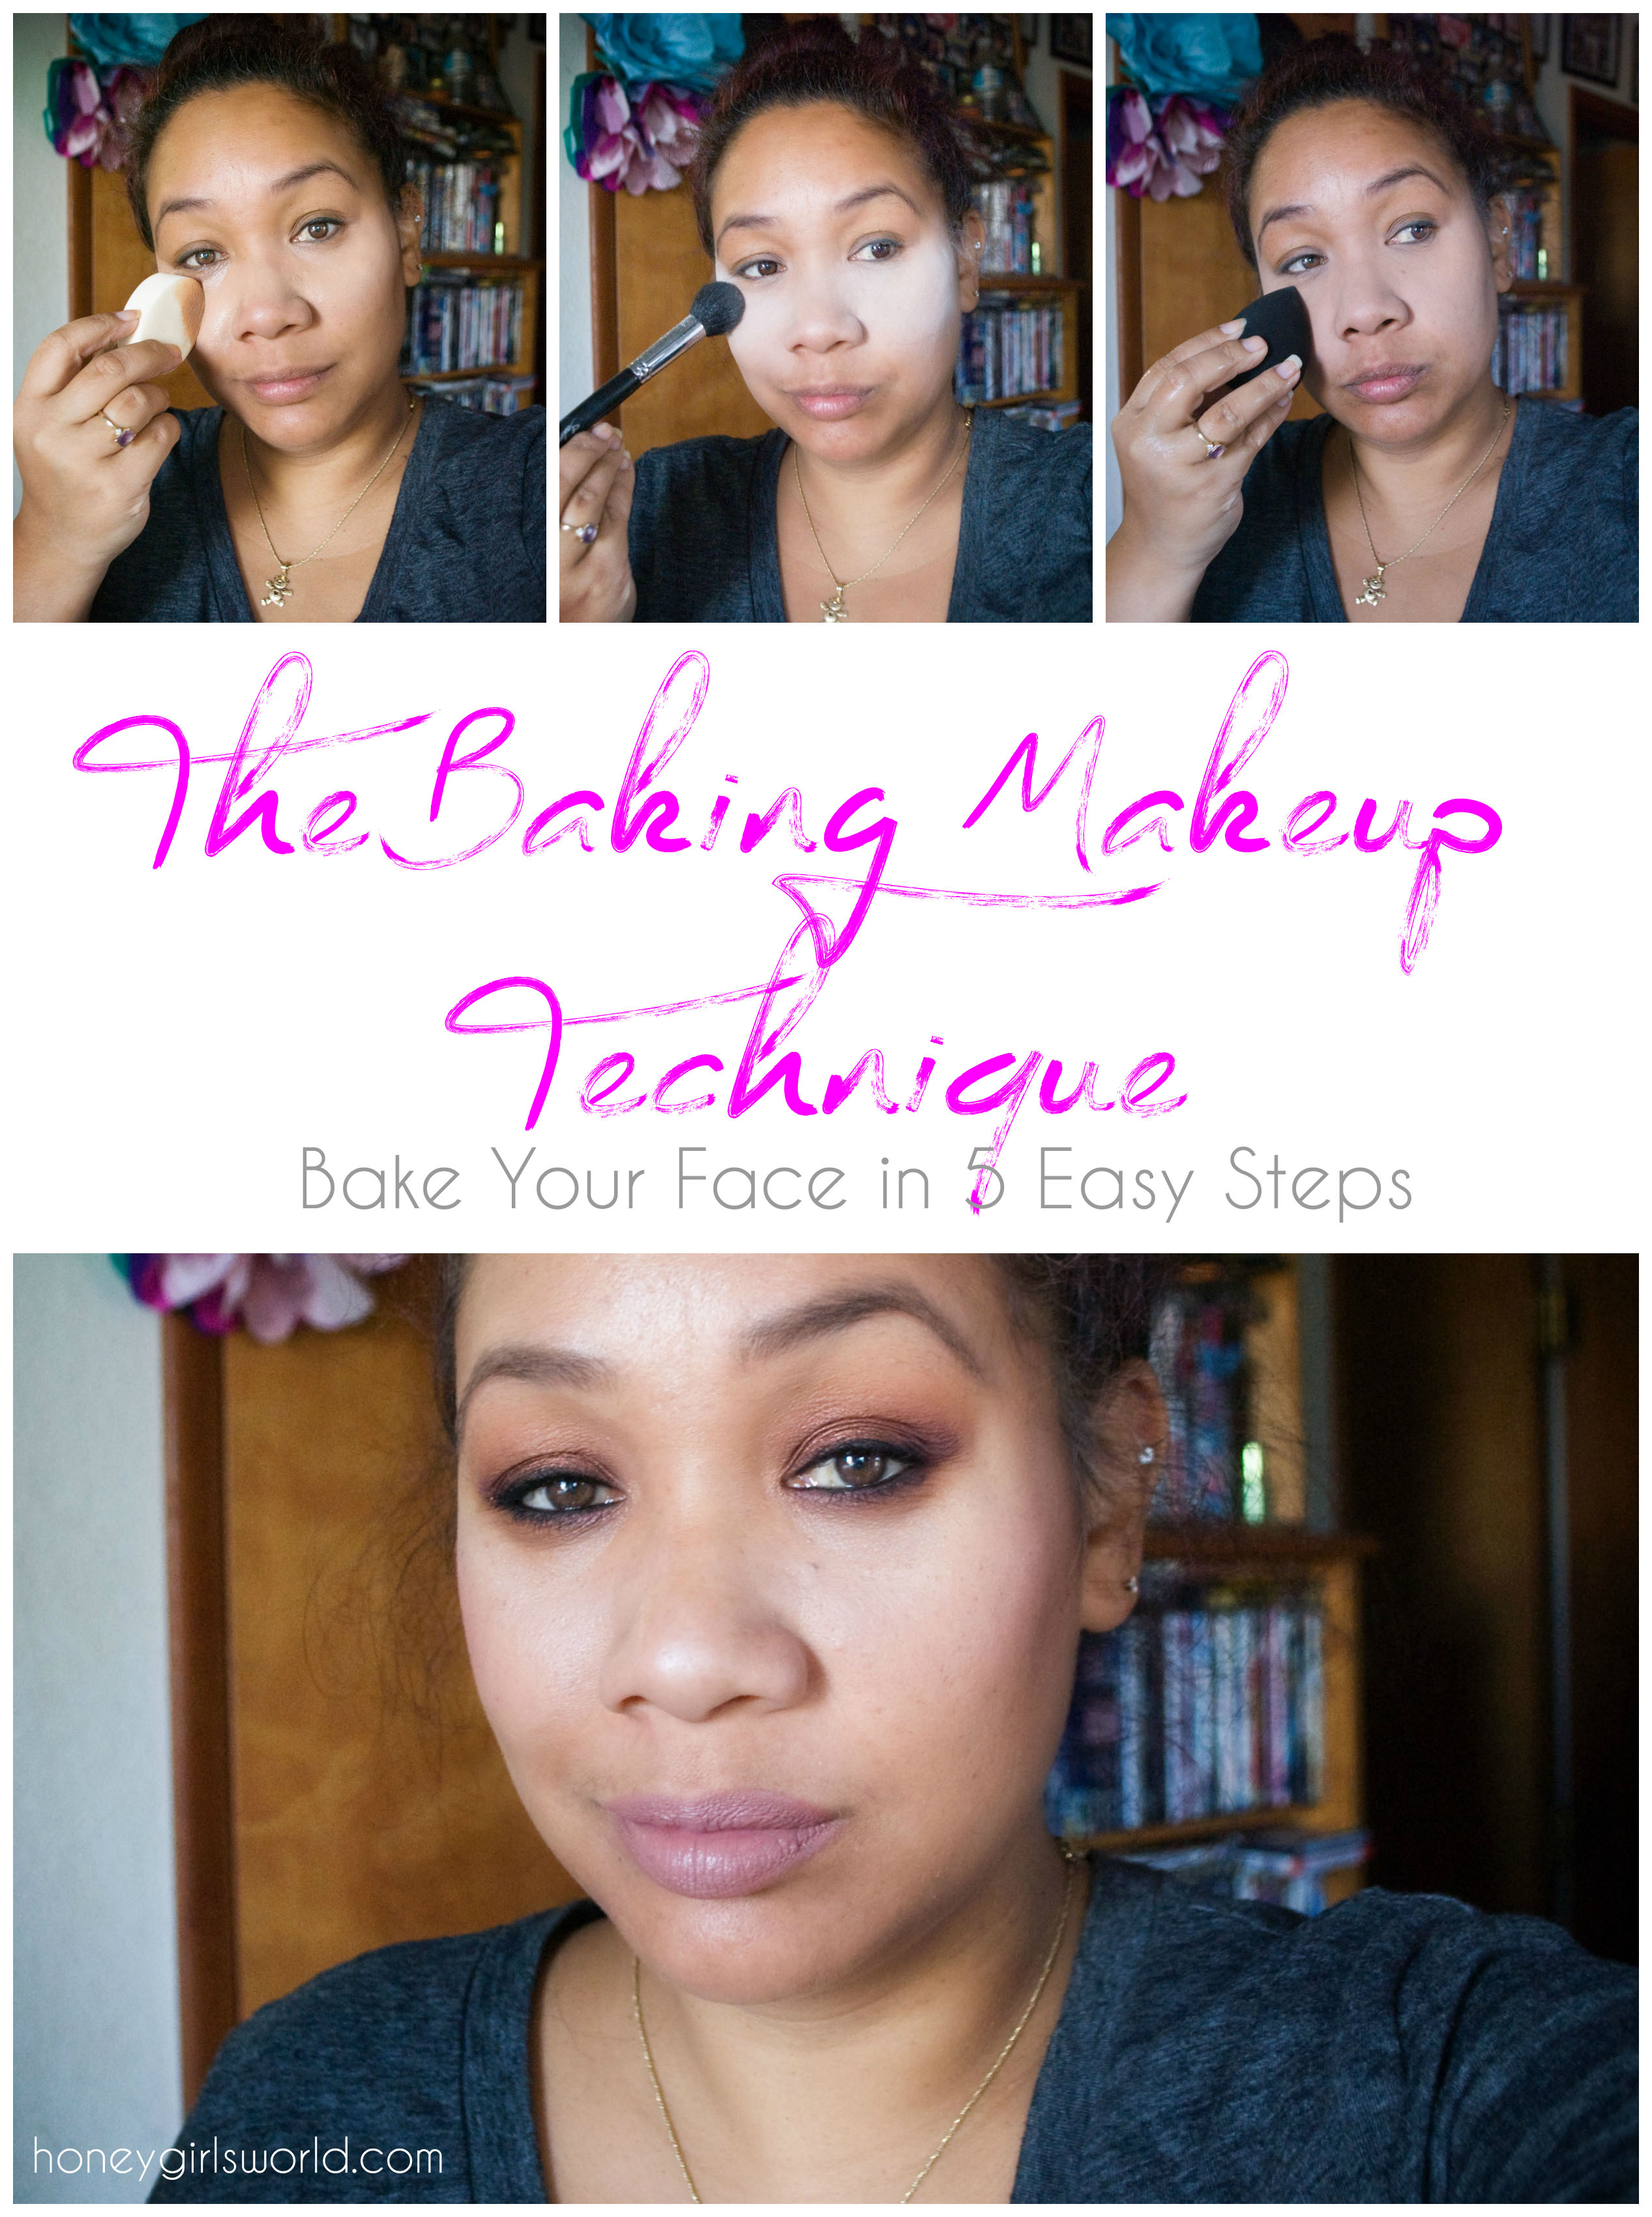 The Baking Makeup Technique - Bake Your Face In 5 Easy Steps